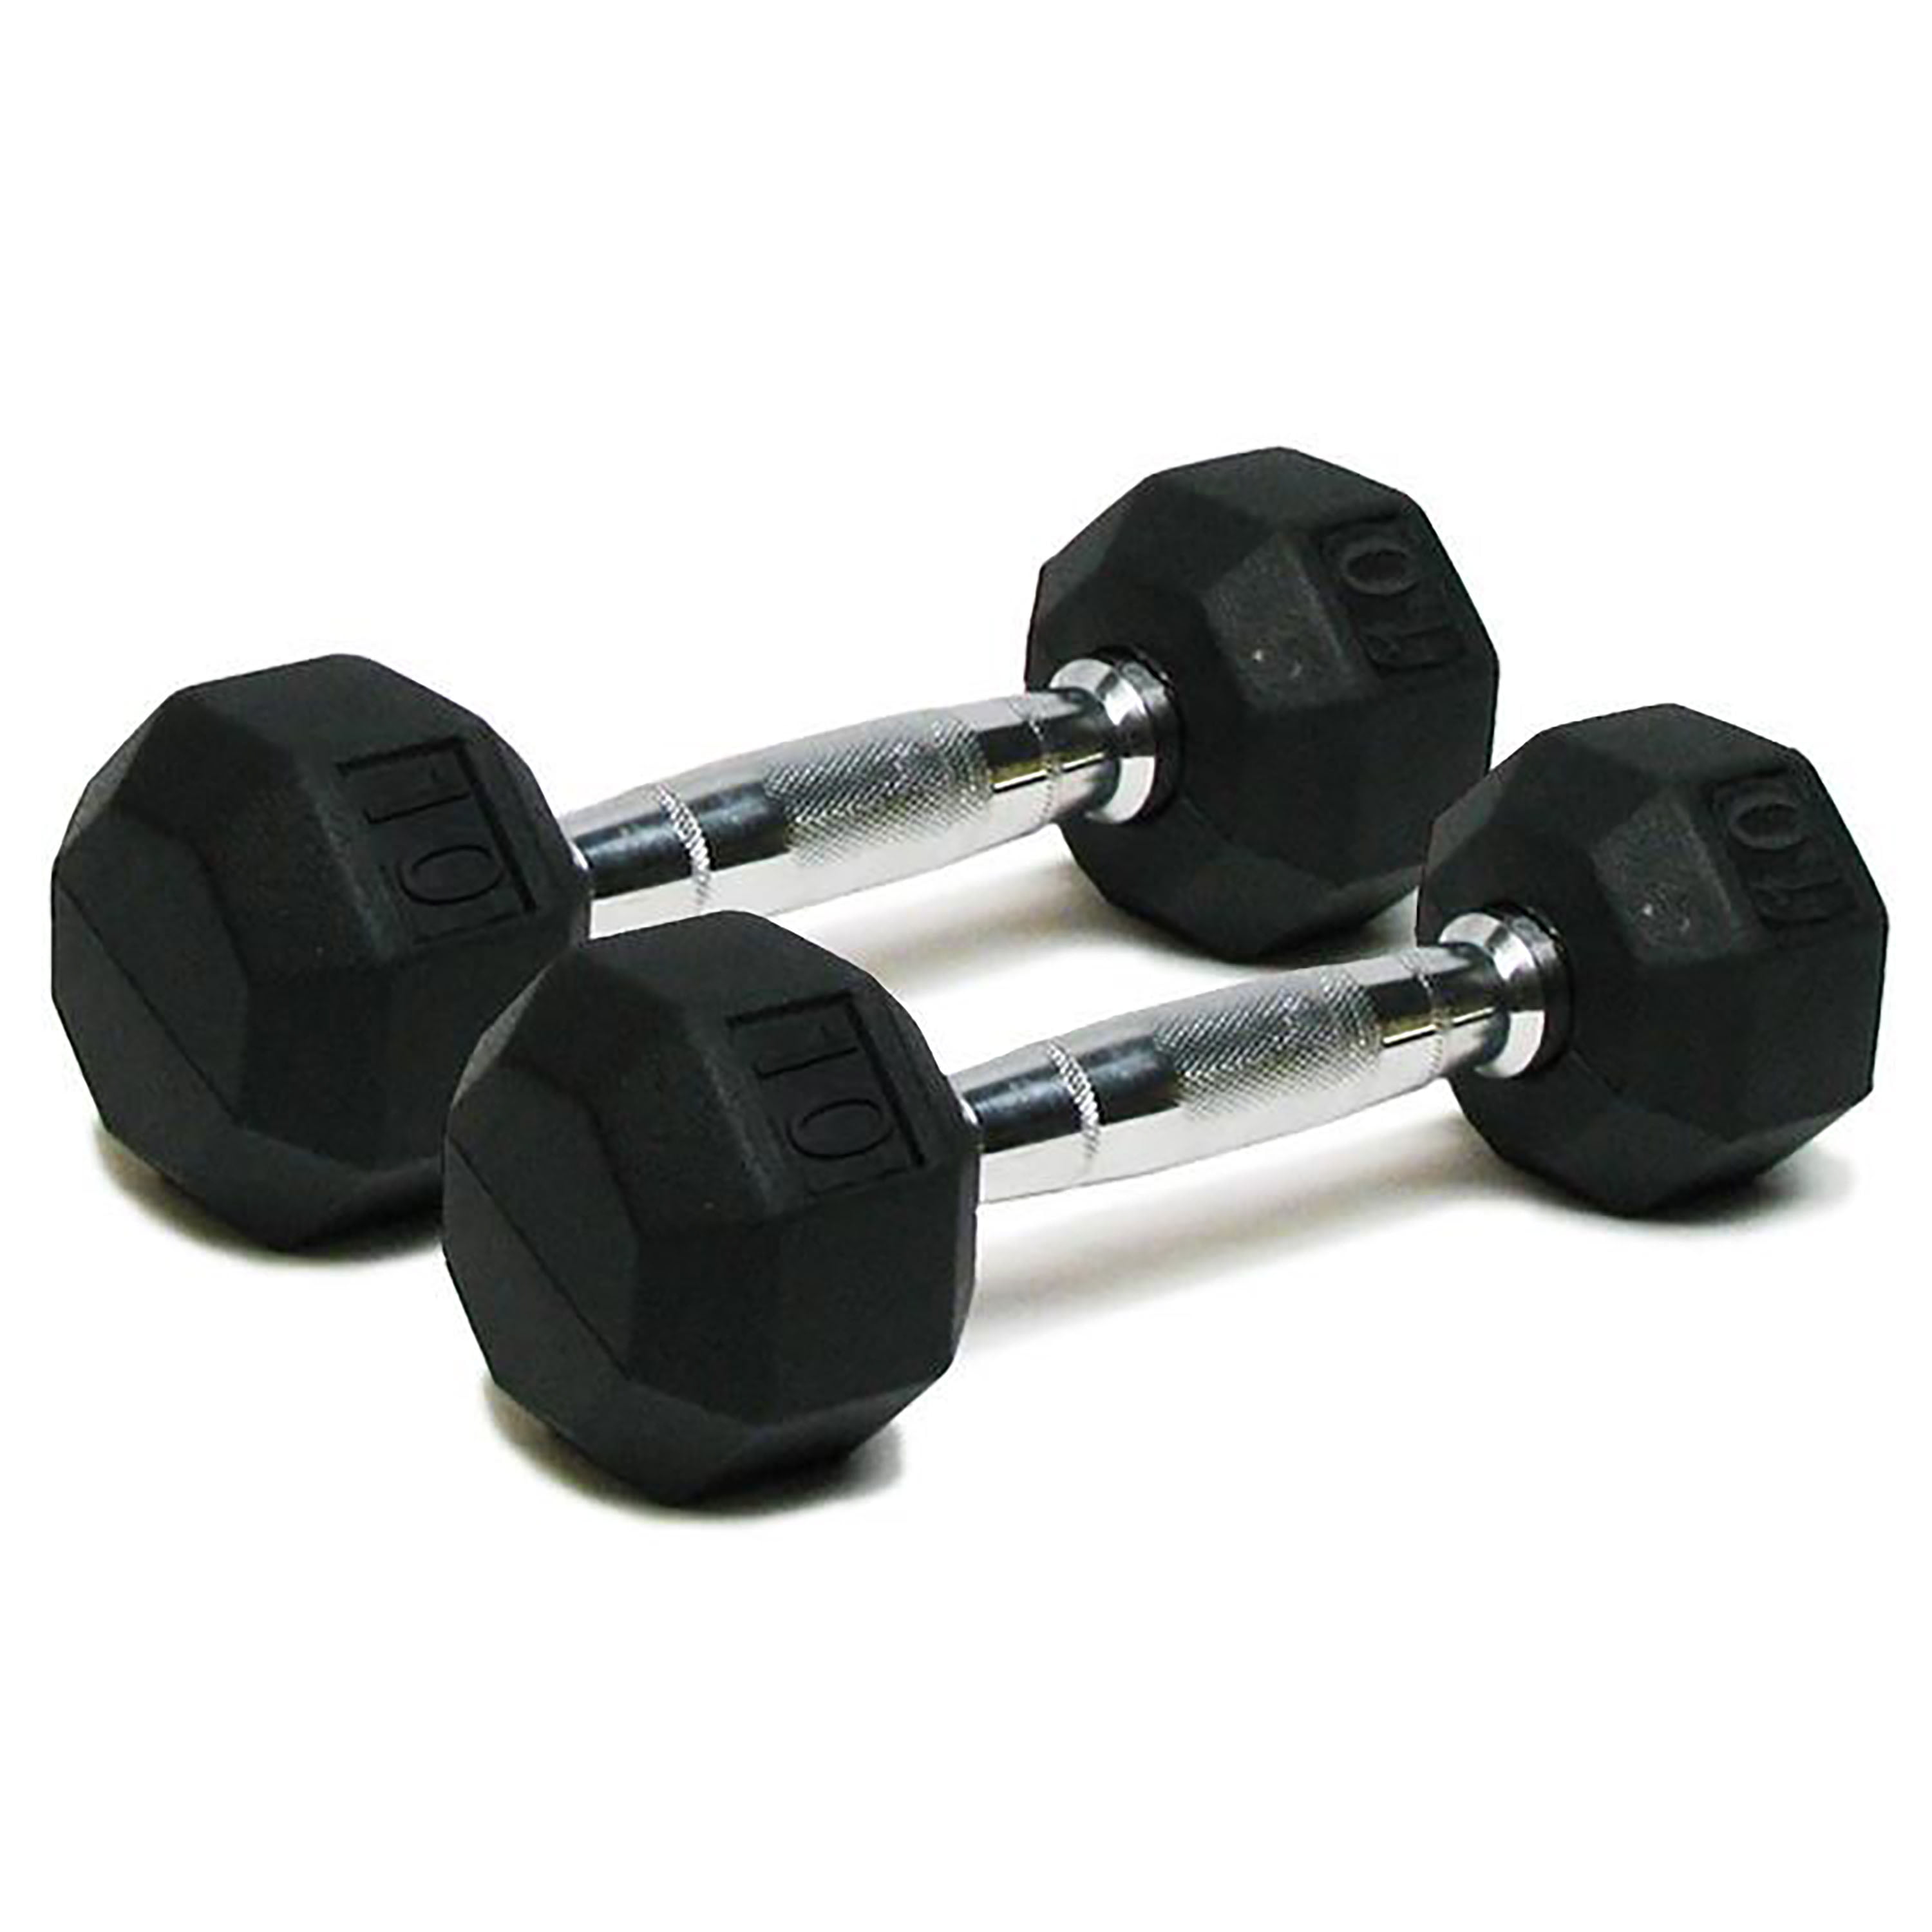 NEW CAP 5LB Pound Dumbbells Pair Rubber Coated Hex Weights 10LB Total 2 